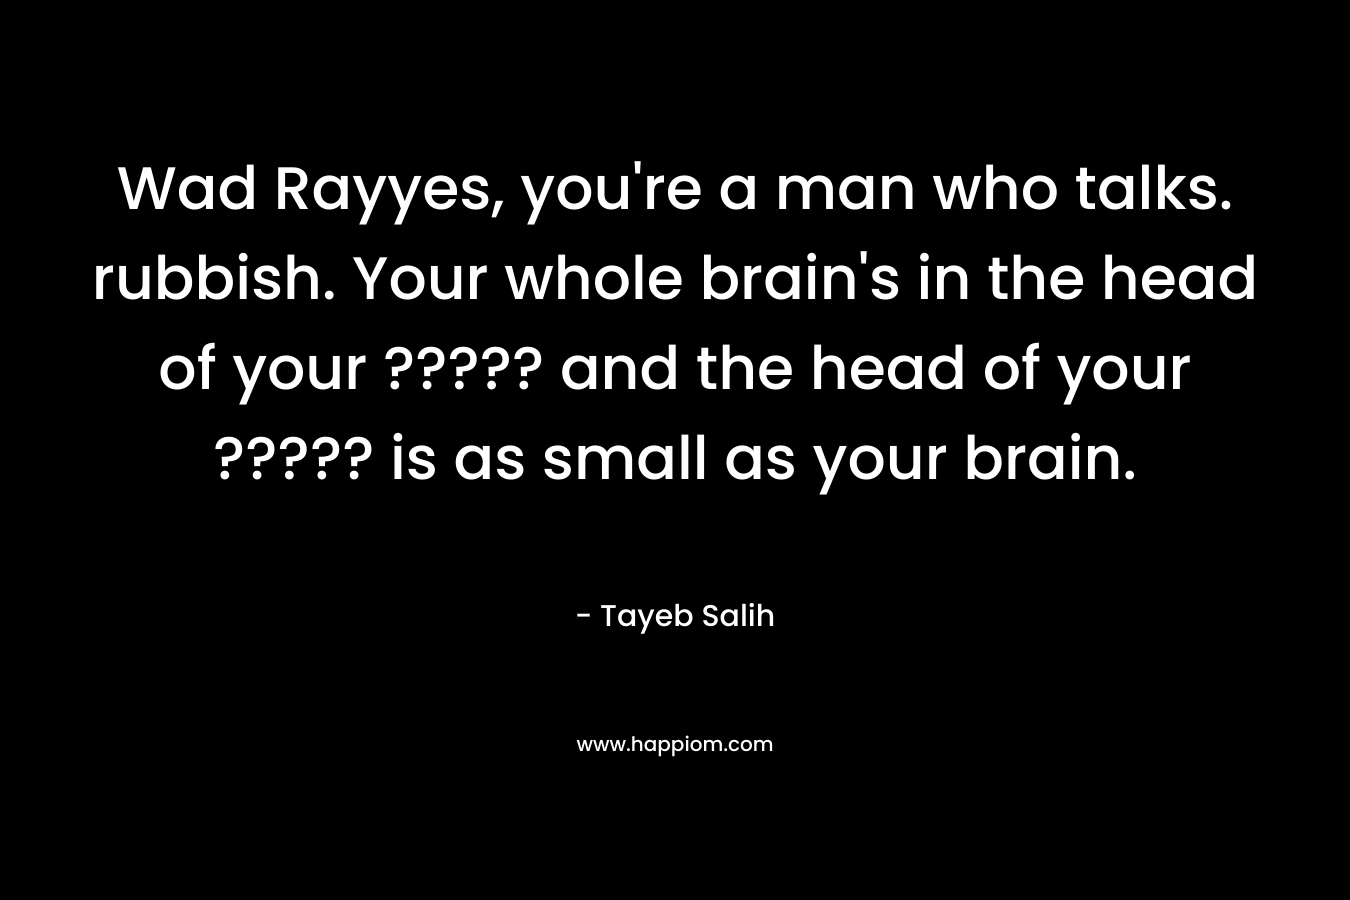 Wad Rayyes, you're a man who talks. rubbish. Your whole brain's in the head of your ????? and the head of your ????? is as small as your brain.